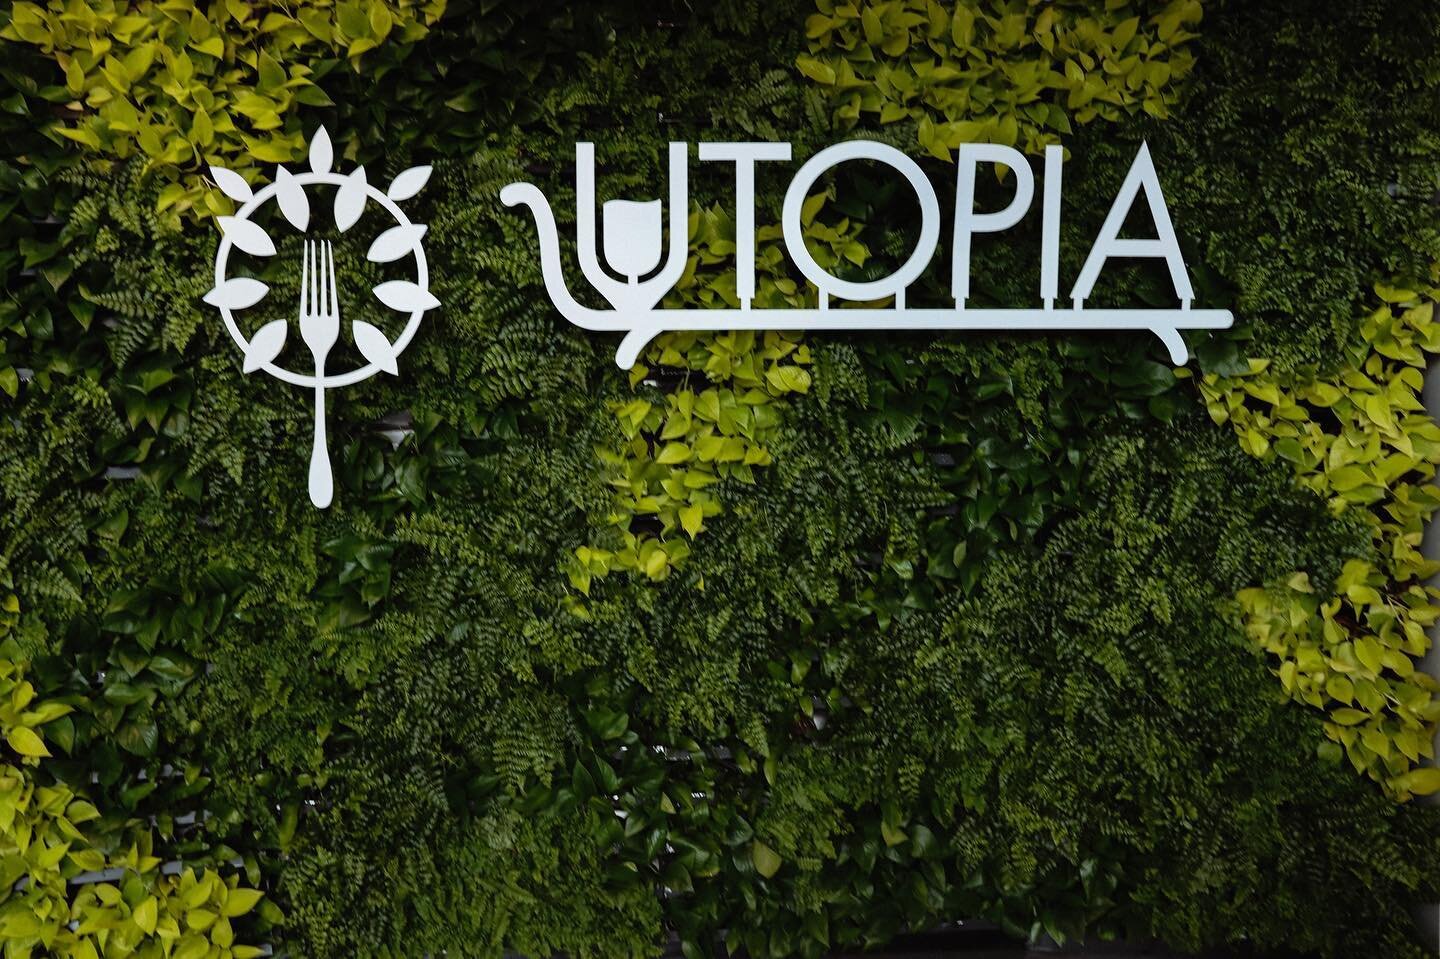 And that&rsquo;s a wrap on our first ever Utopia Seaport Festival! Thank you for those who joined us this first year, we loved meeting each and every one of you. If you&rsquo;d like to stay up to date on all things Utopia, make sure to sign up for ou